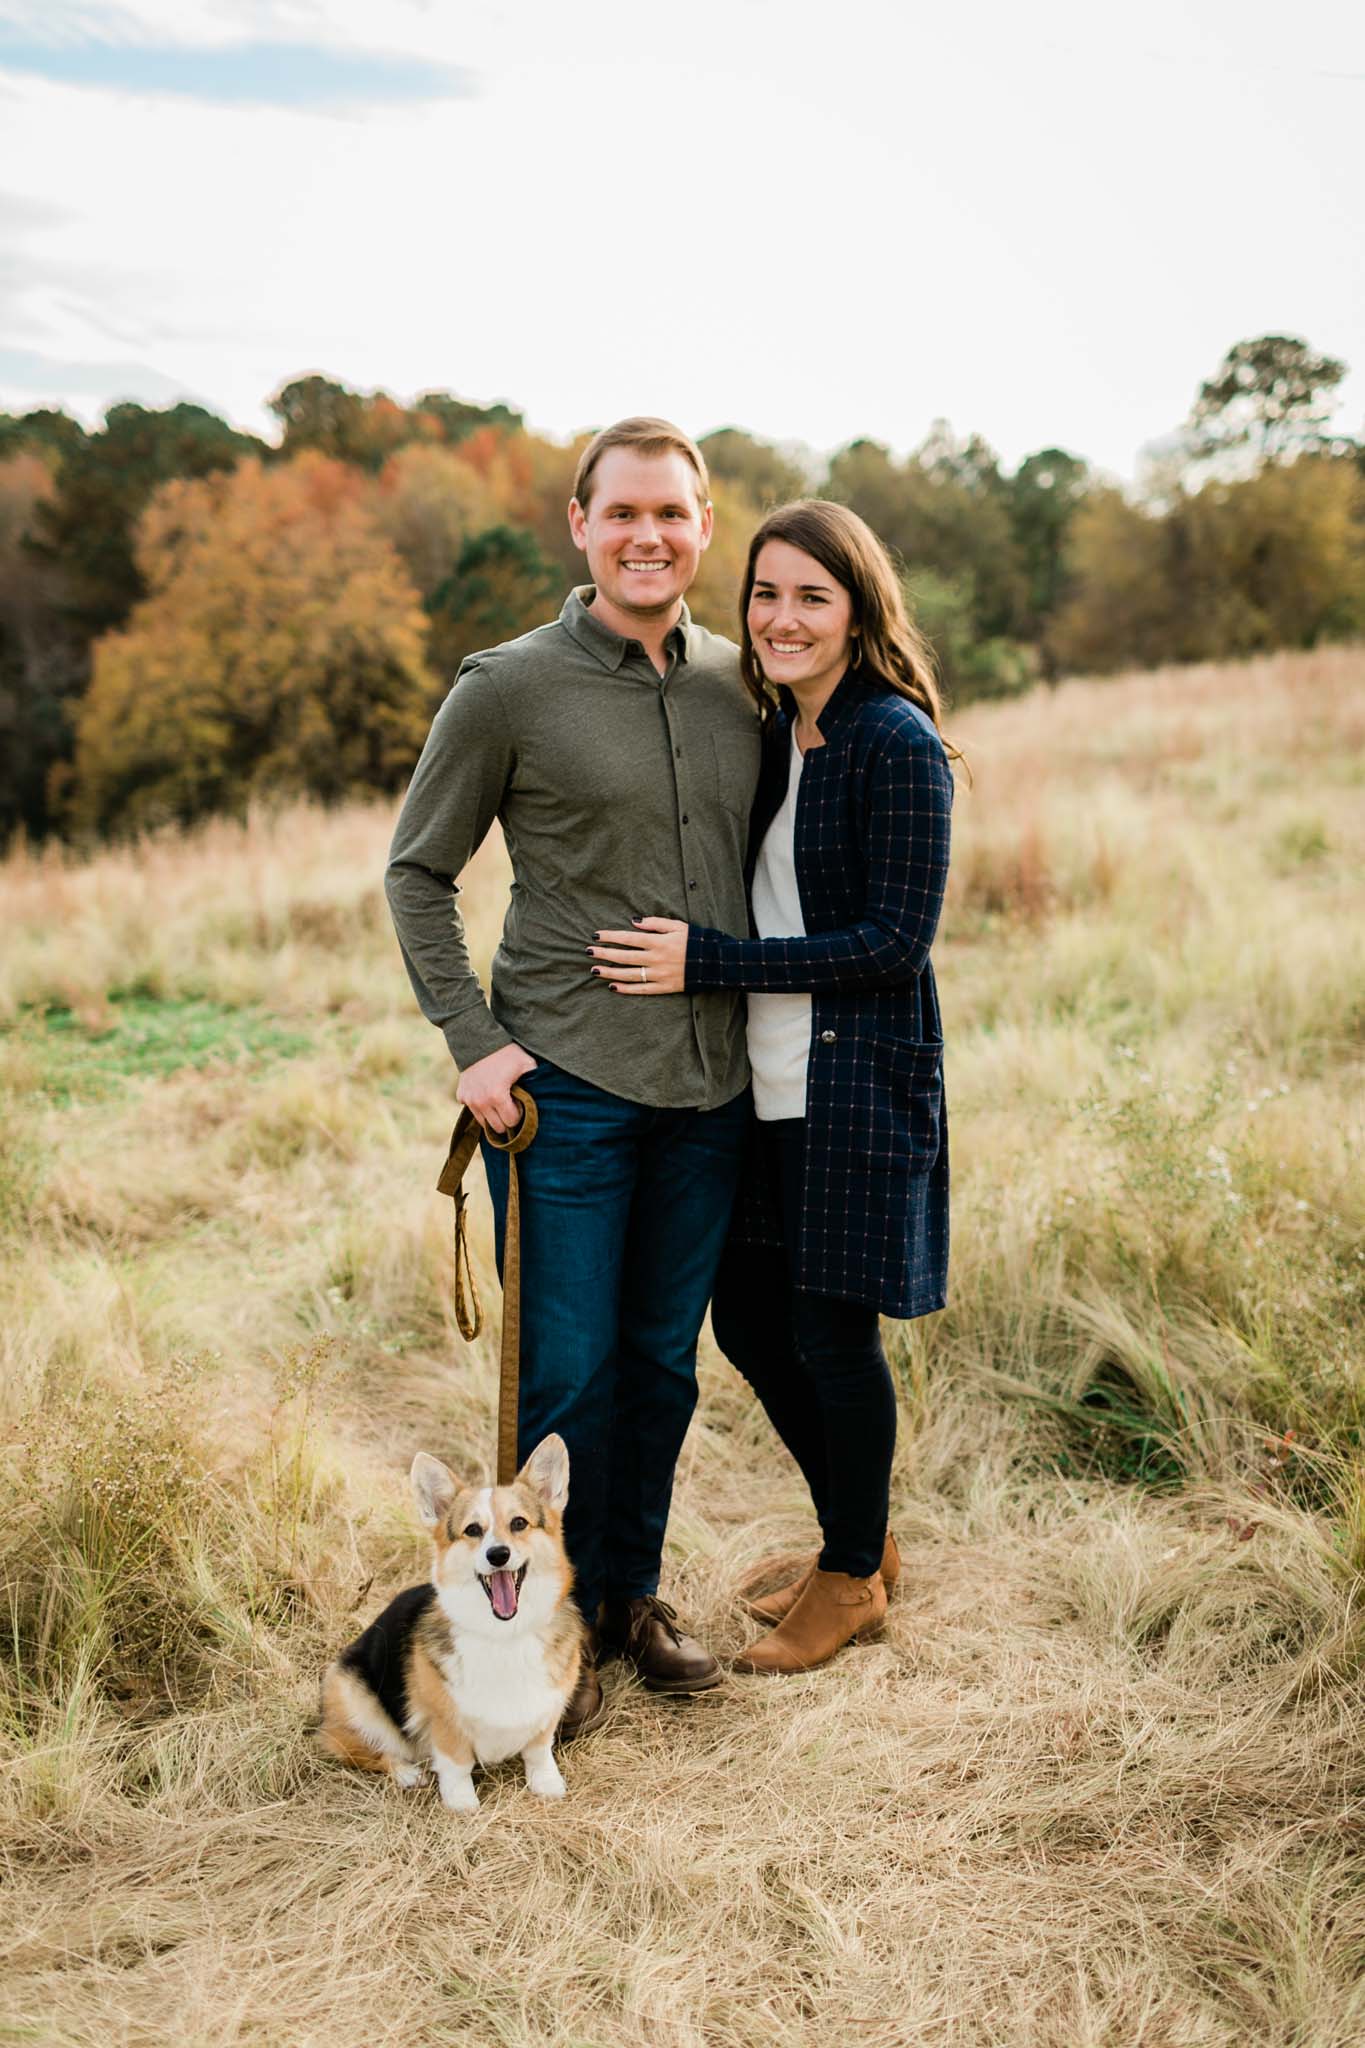 Outdoor family portrait with corgi at NCMA | Raleigh Family Photographer | By G. Lin Photography